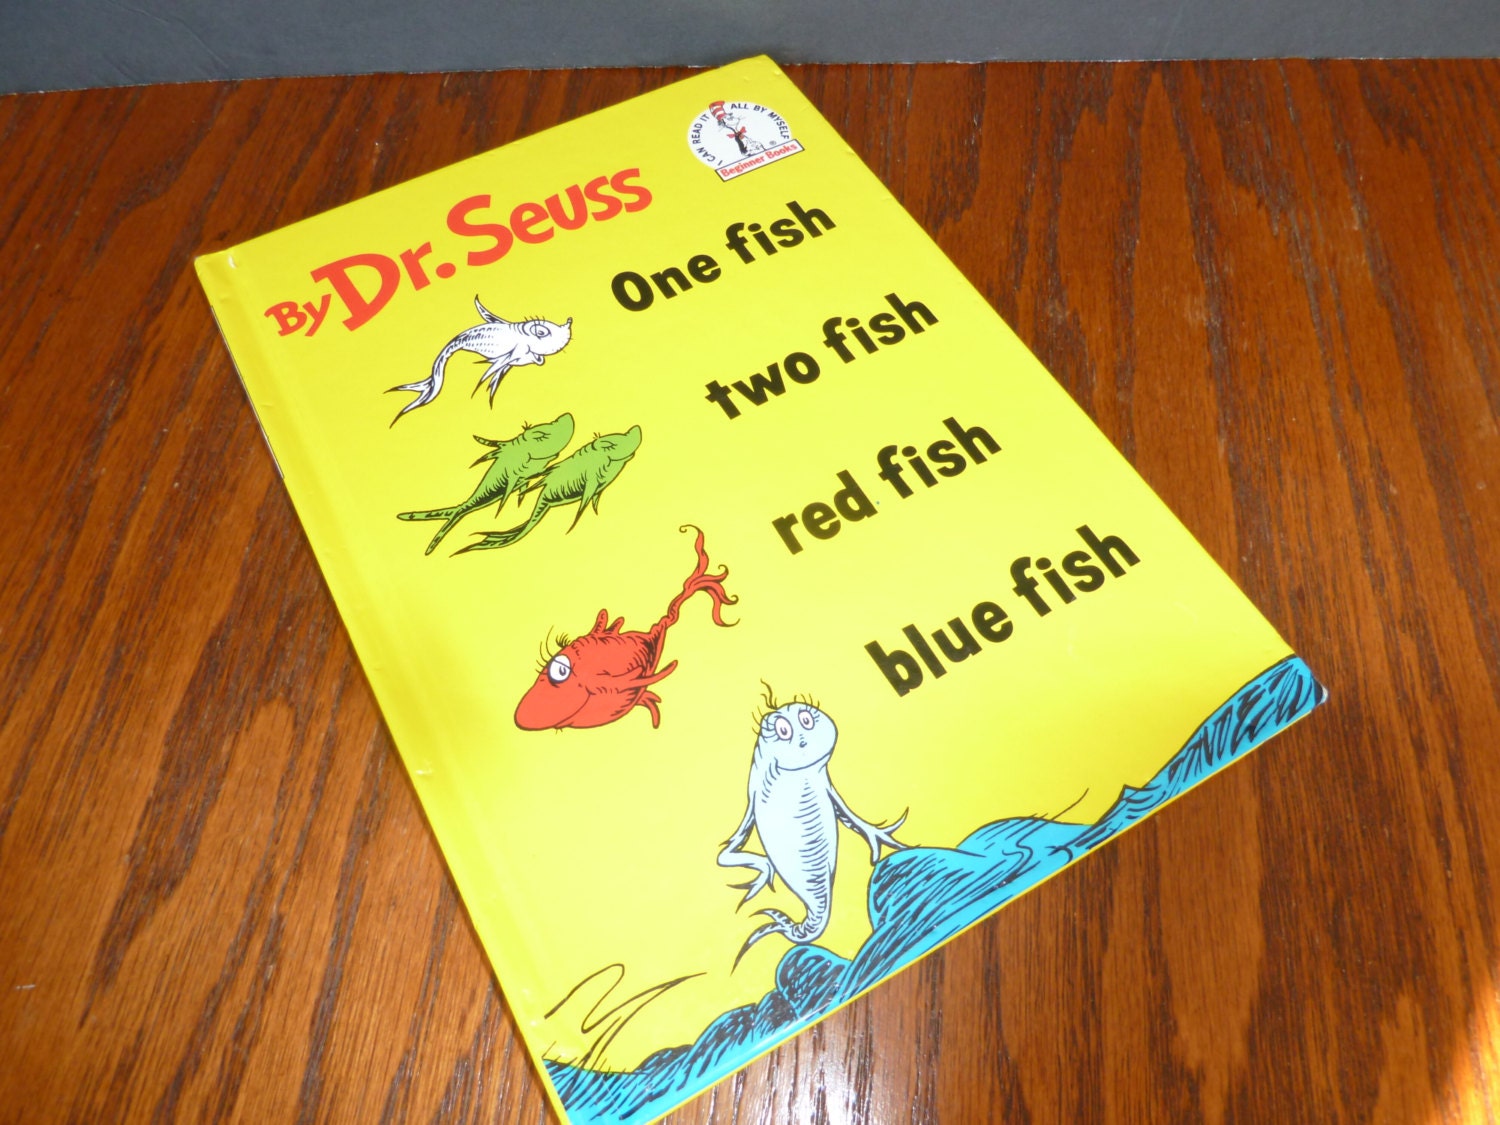 Vintage children's book One fish two fish red fish blue